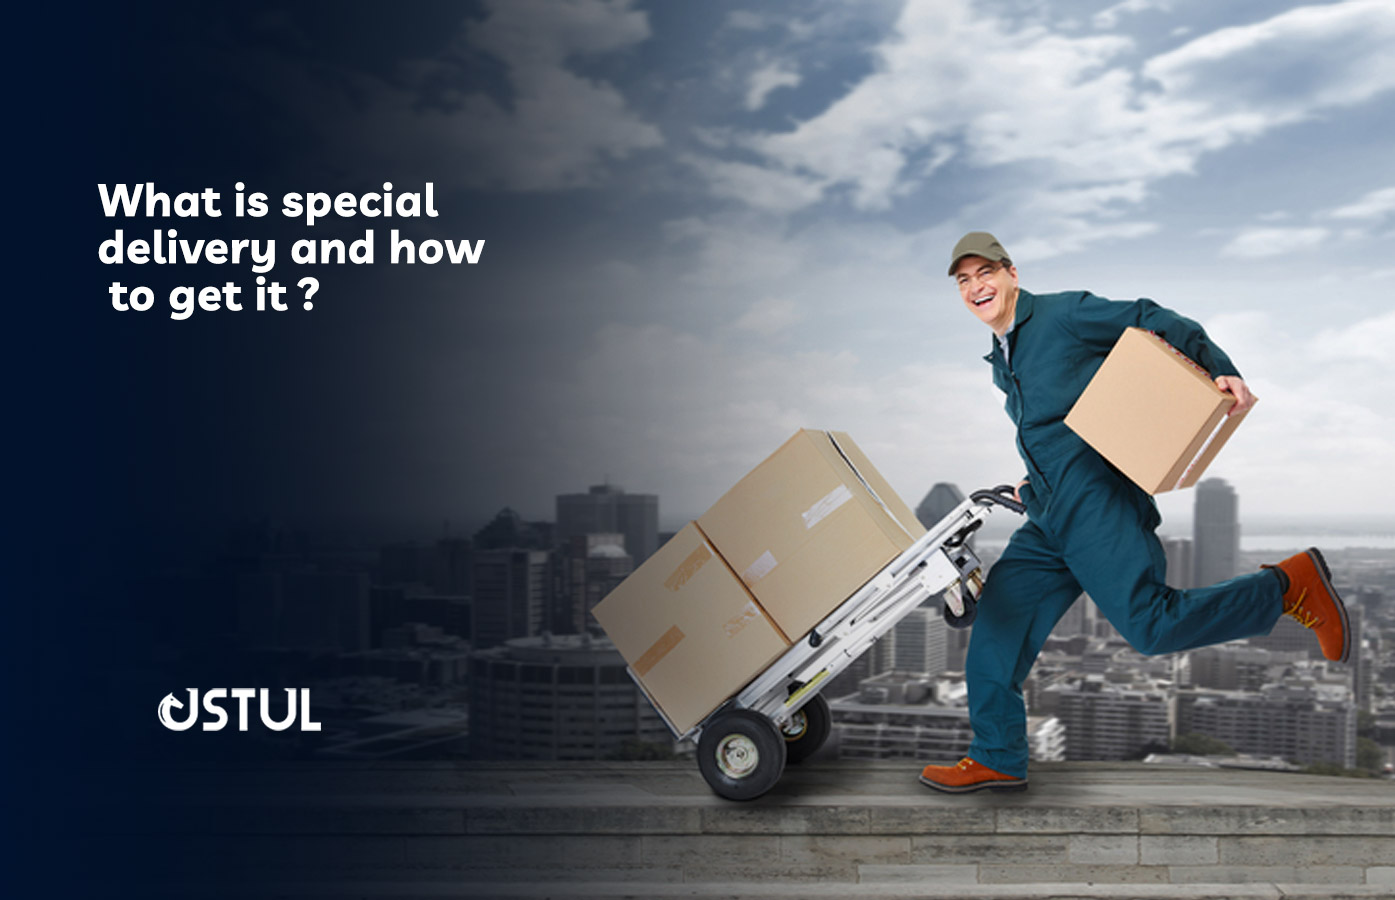 What is special delivery and how get it?